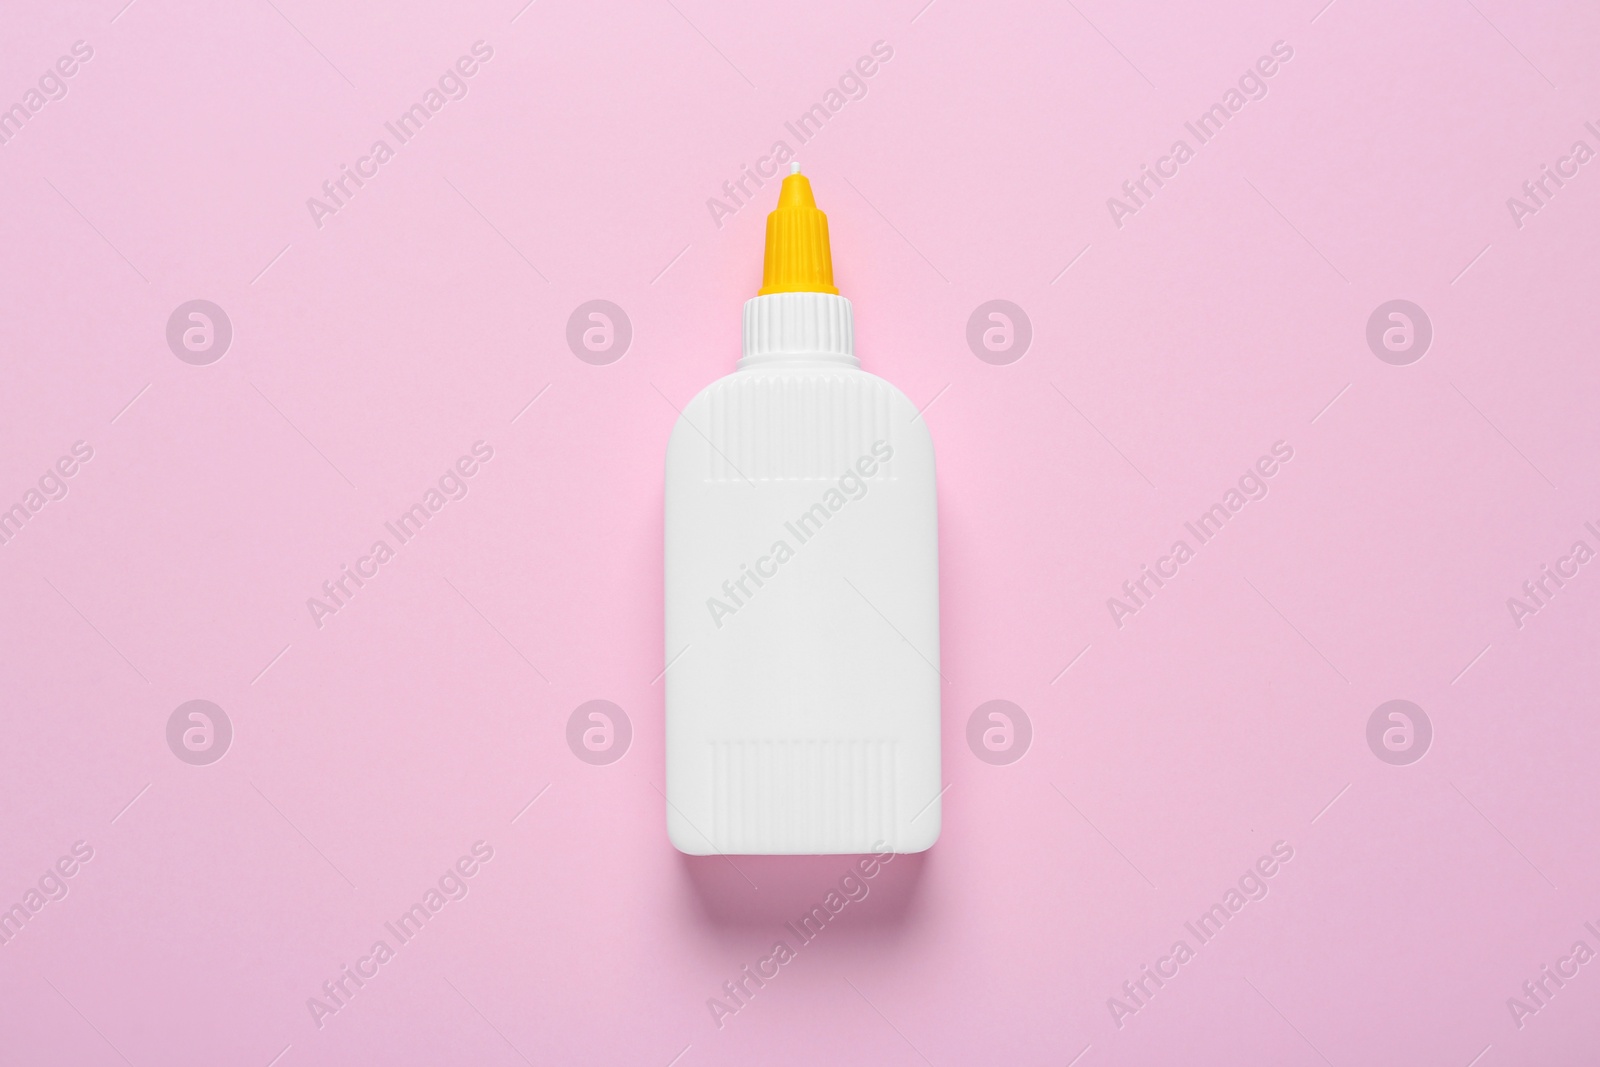 Photo of Bottle of glue on pink background, top view